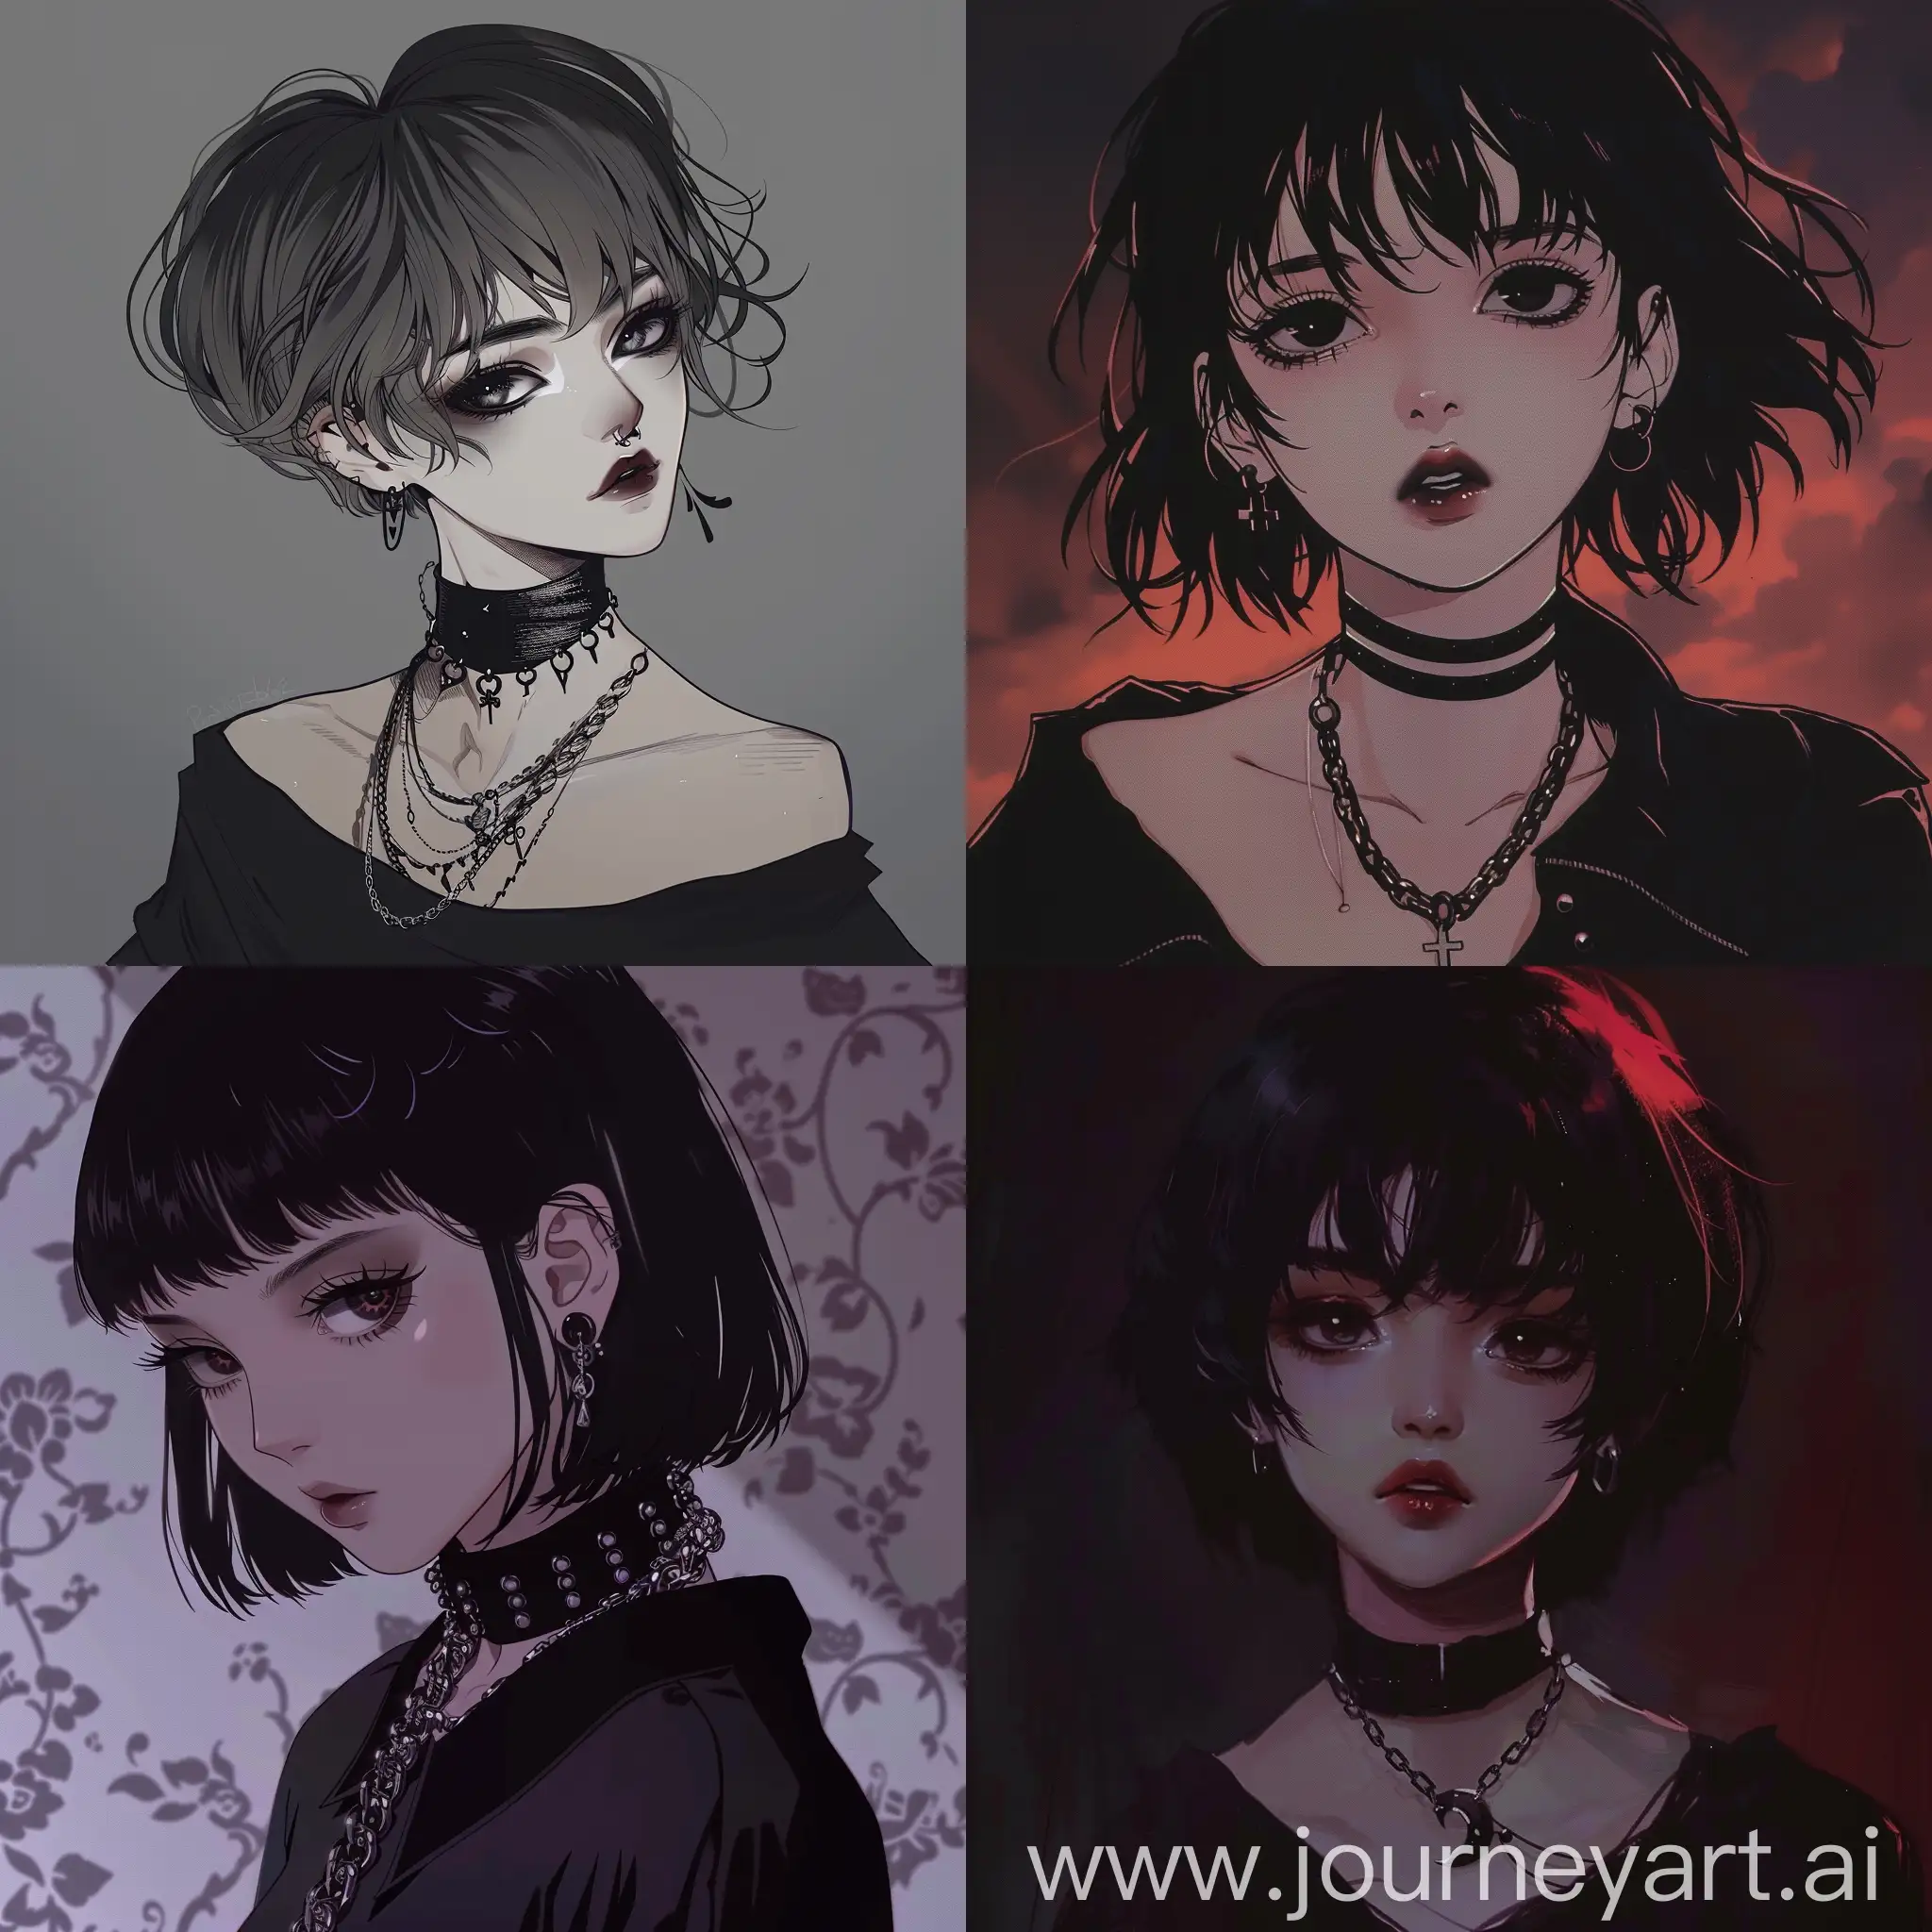 80s-Goth-Anime-PixieHaired-Girl-in-Romantic-Dark-Setting